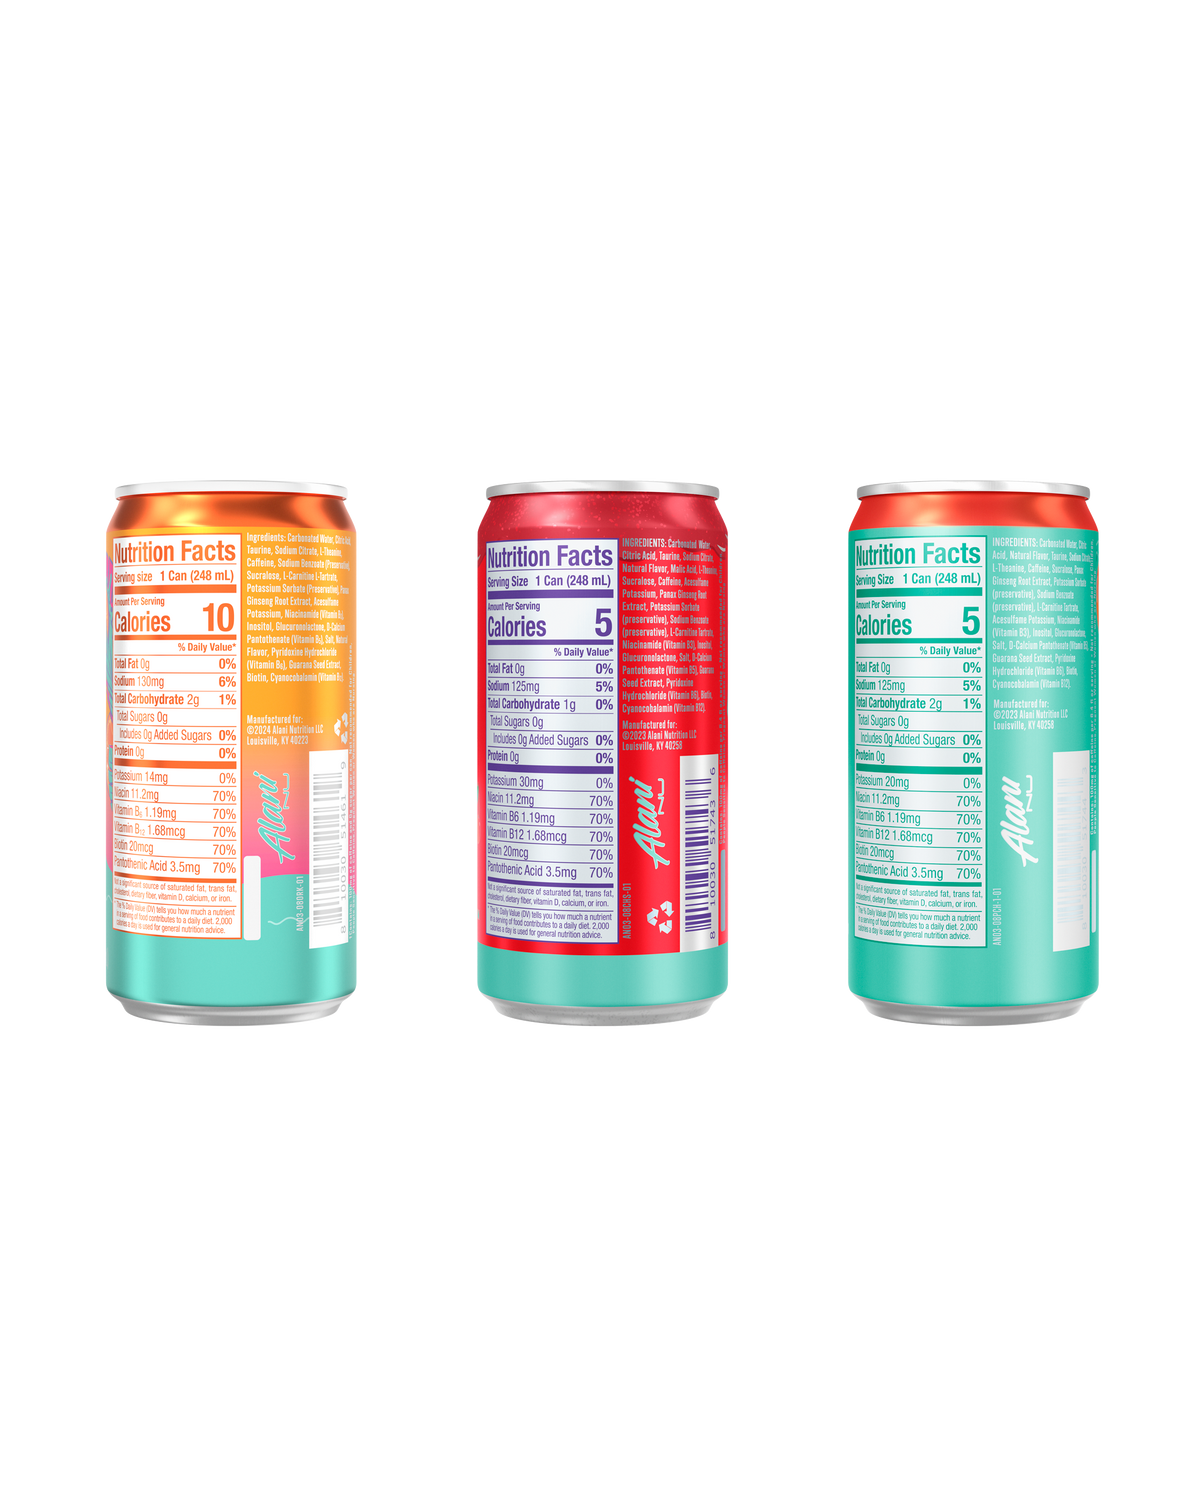 A back view of Mini Cans in flavors Orange Kiss, Cherry Slush and Juicy Peach showcasing nutrition facts.